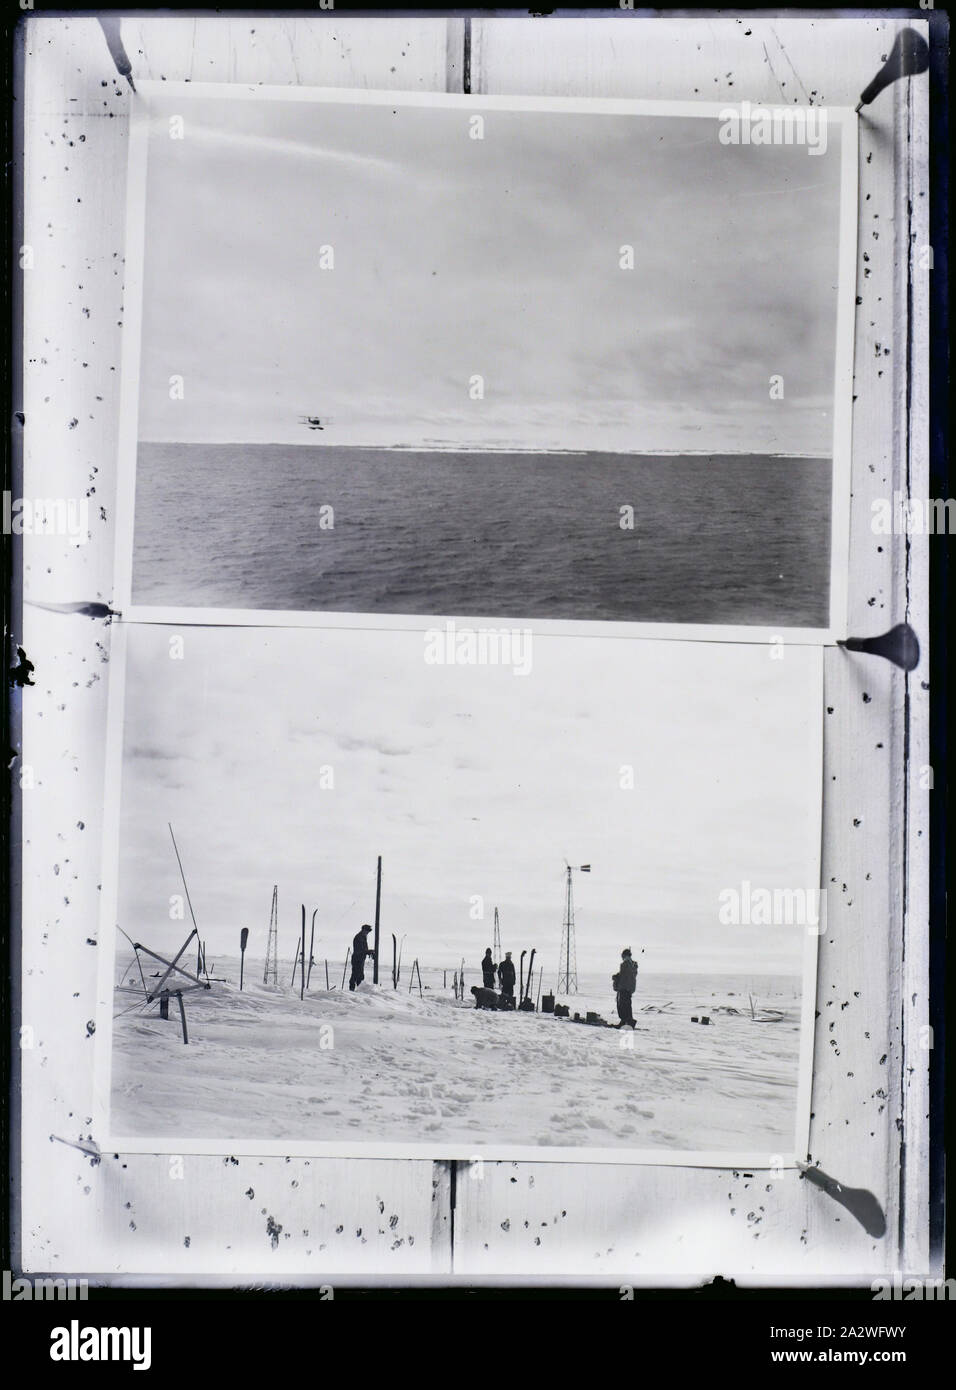 Glass Negative - Copy, 'Reconnaissance Flight' & 'Little America', Ellsworth Relief Expedition, Antarctica, 1935-1936, Black and white glass negative of two images, 'Reconnaissance Flight' & 'Little America', Ellsworth Relief Expedition, Antarctica. One of 328 images in various formats including artworks, photographs, glass negatives and lantern slides Stock Photo